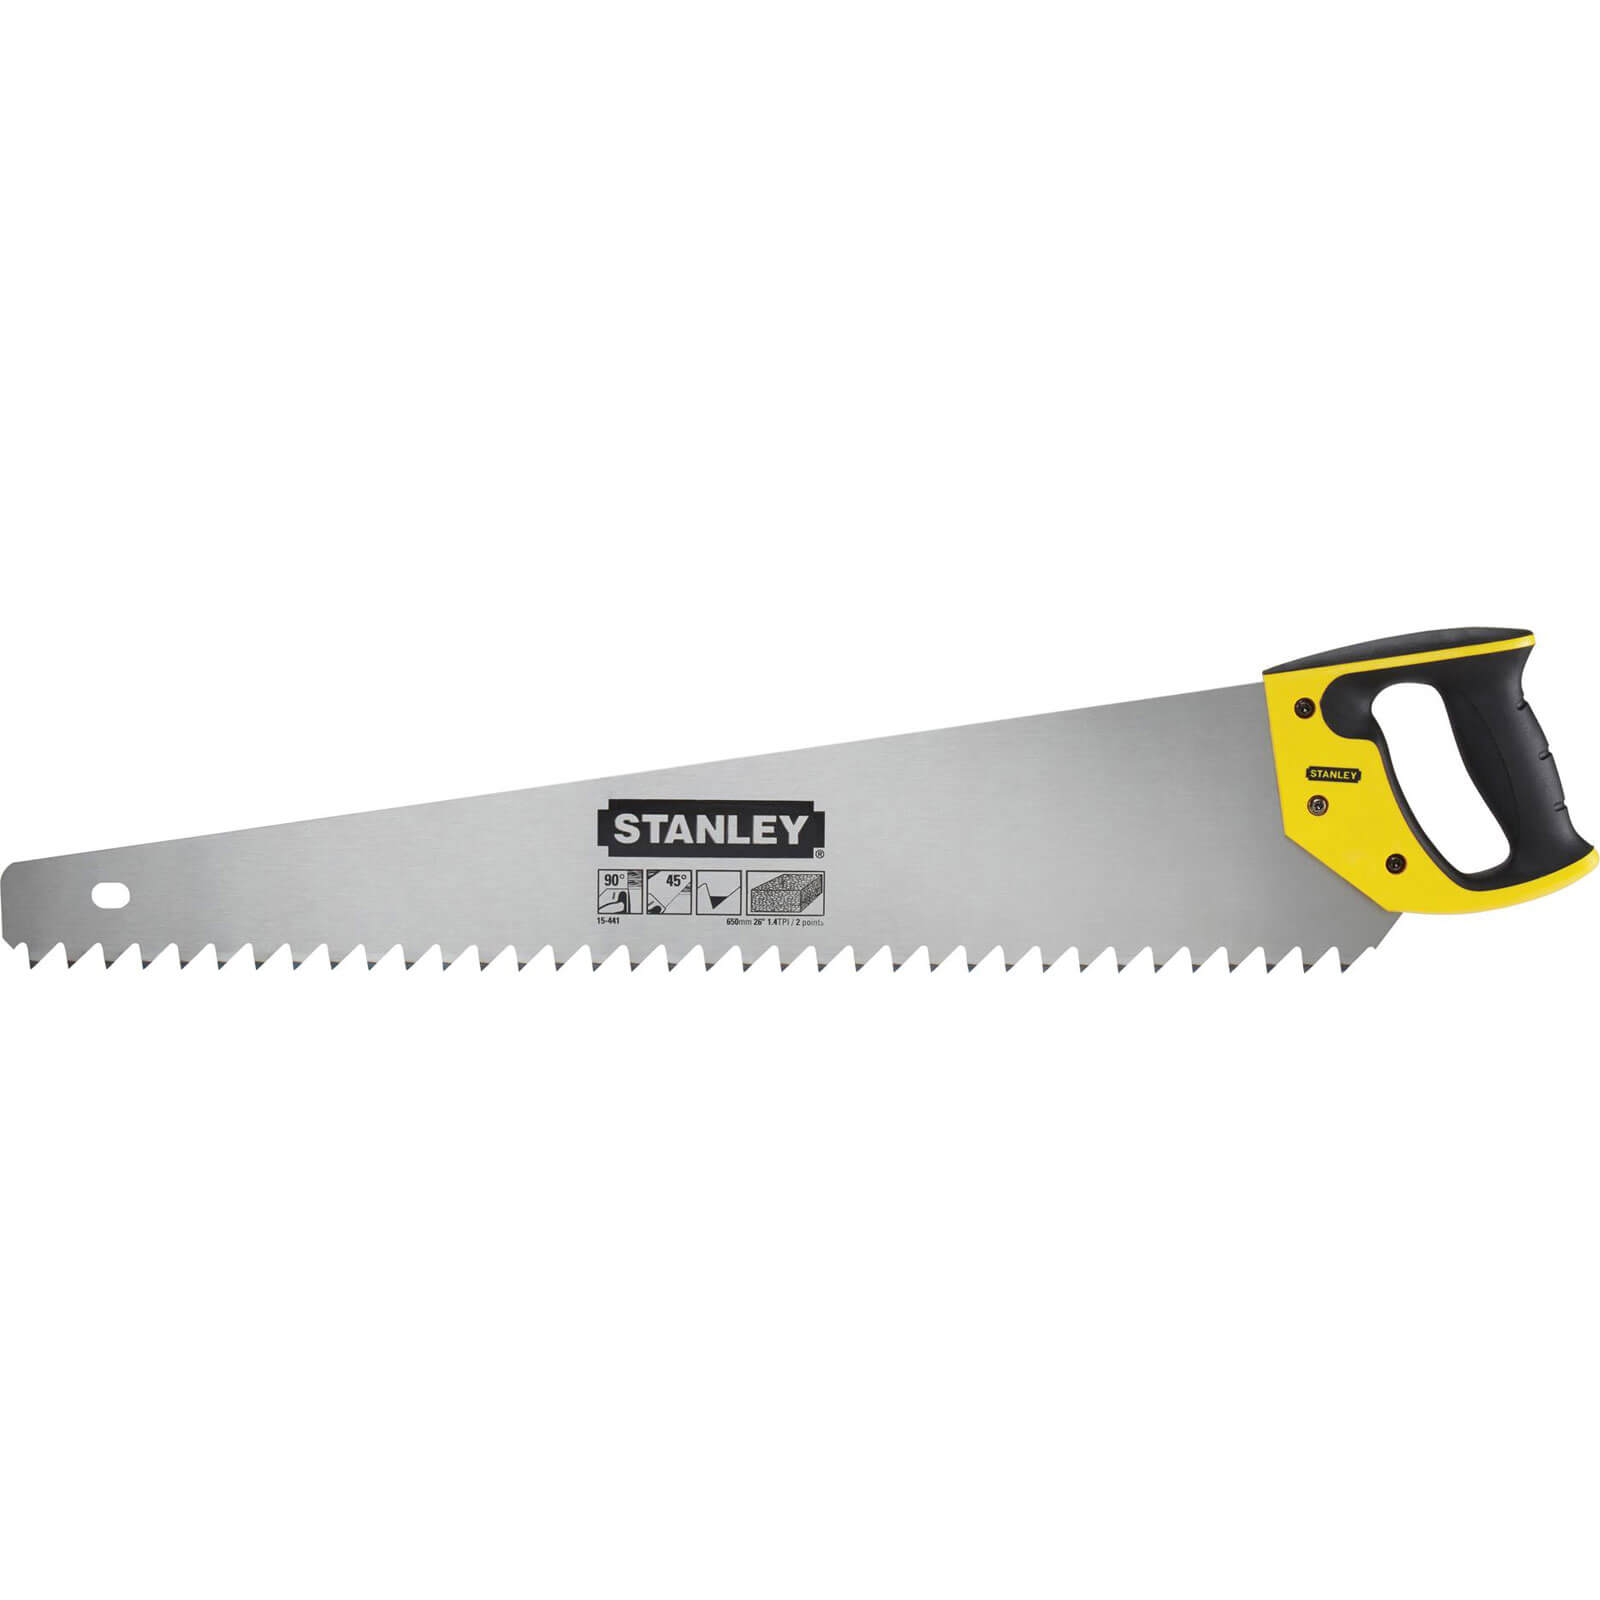 Image of Stanley Fatmax Cellular Concrete Saw 26" / 660mm 1.4tpi